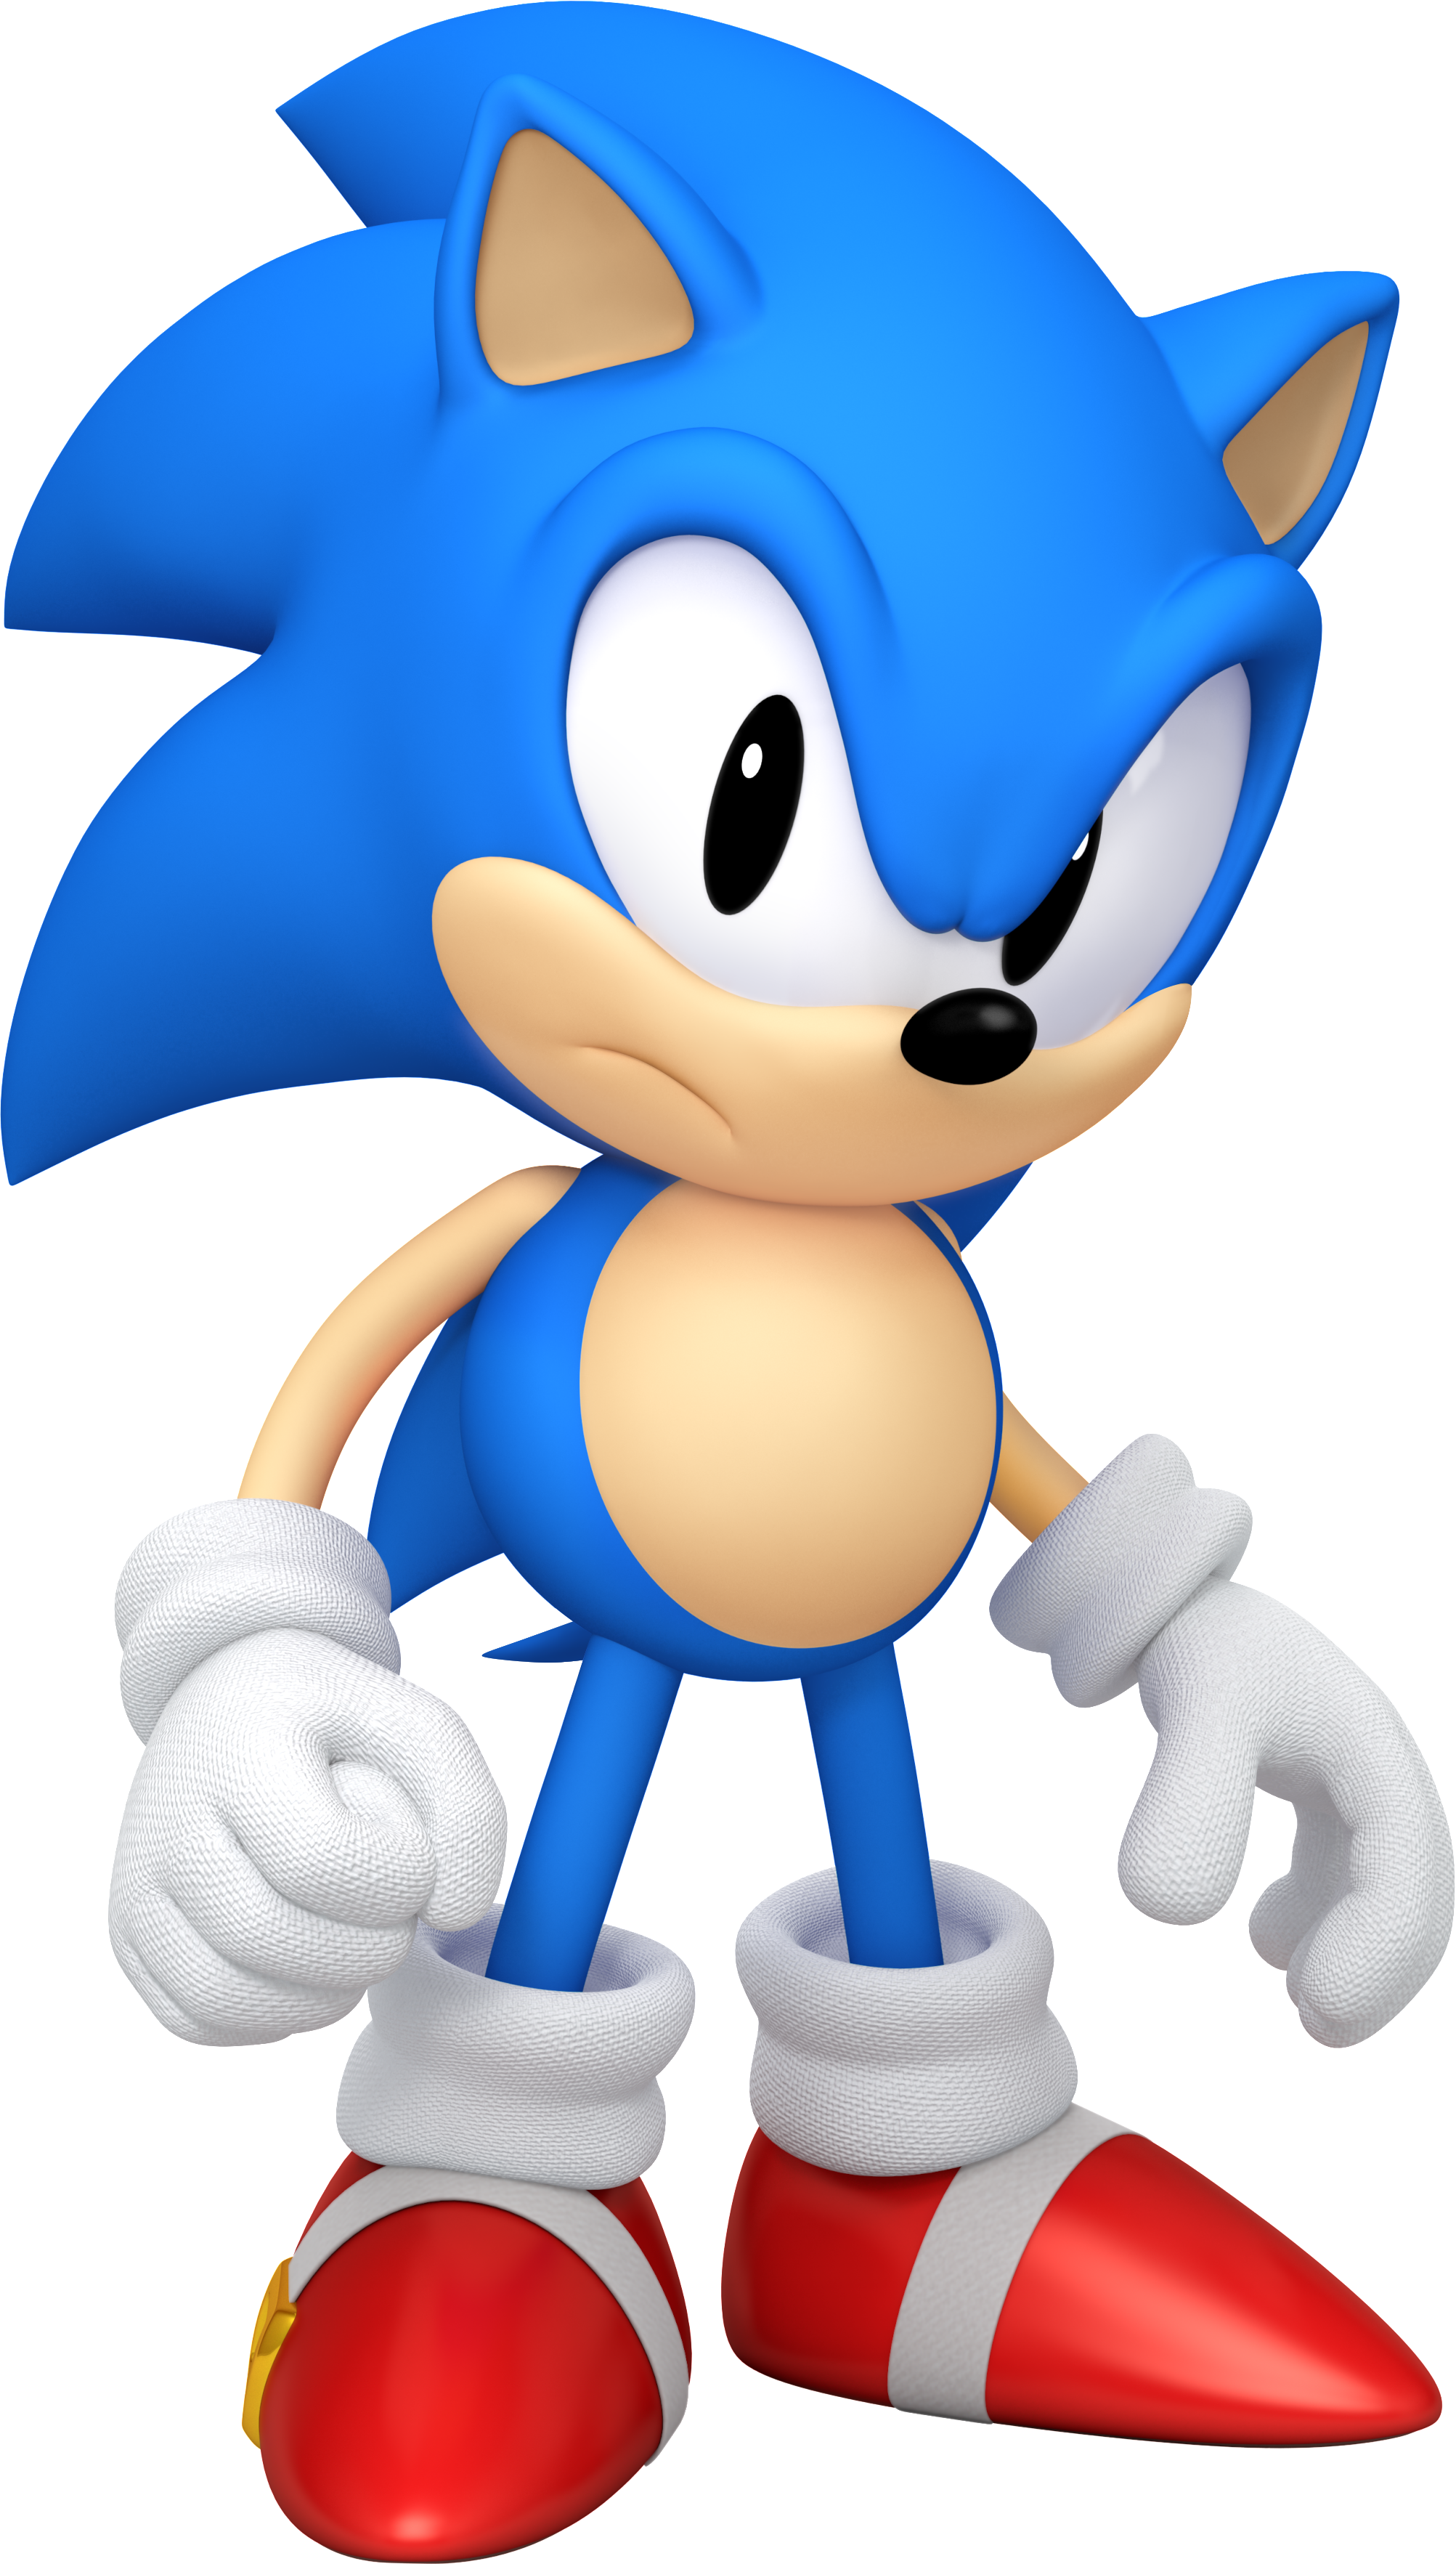 Metal Sonic (Canon, Game Character)/Adamjensen2030, Character Stats and  Profiles Wiki